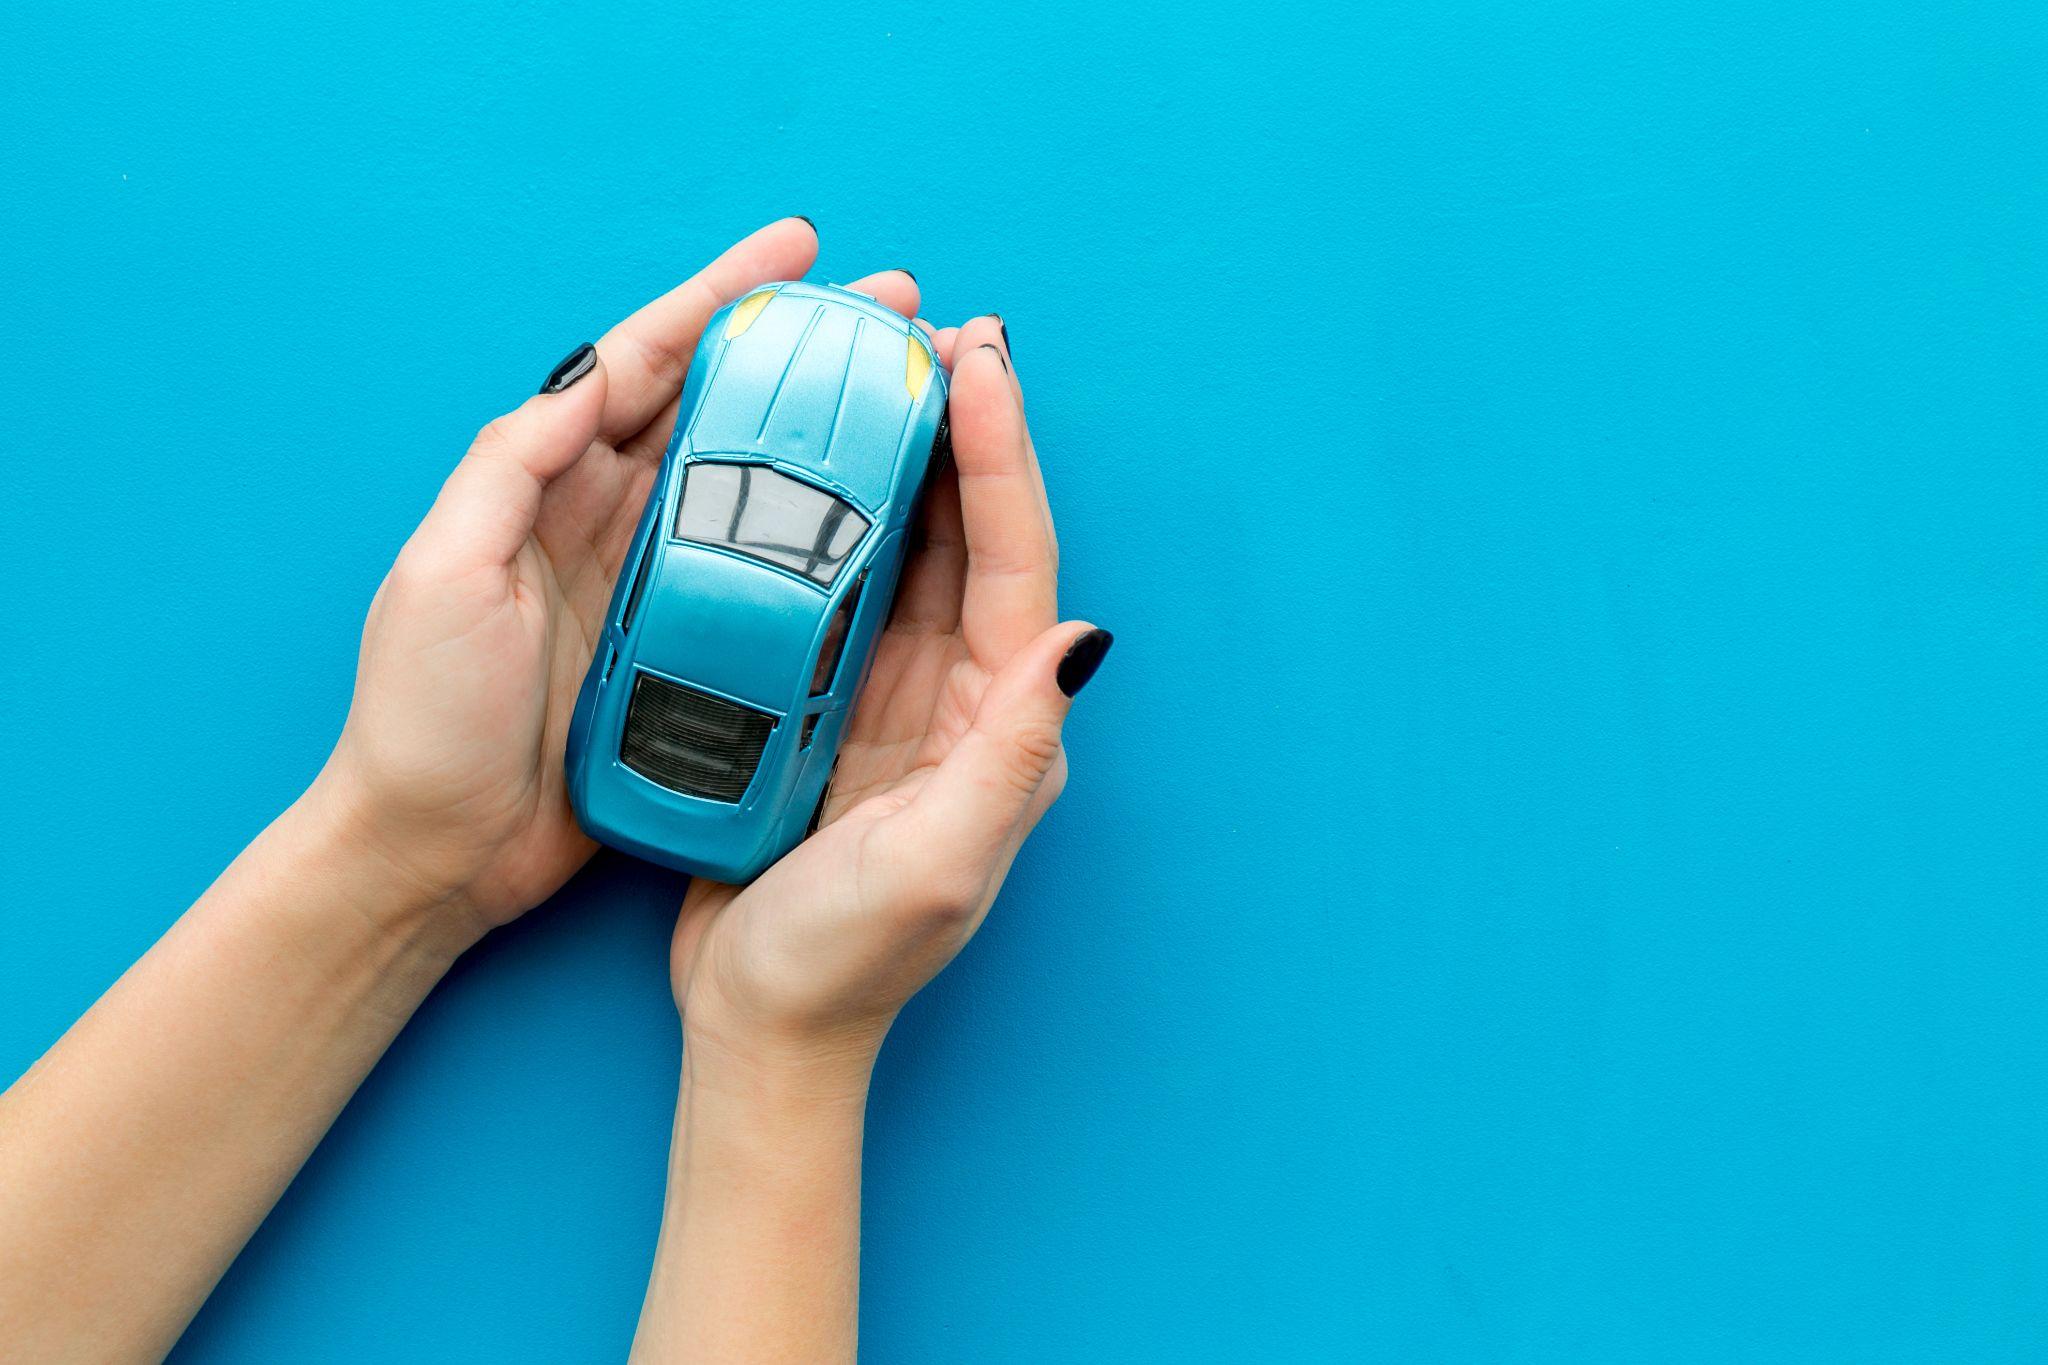 Car toy in female hands on blue background